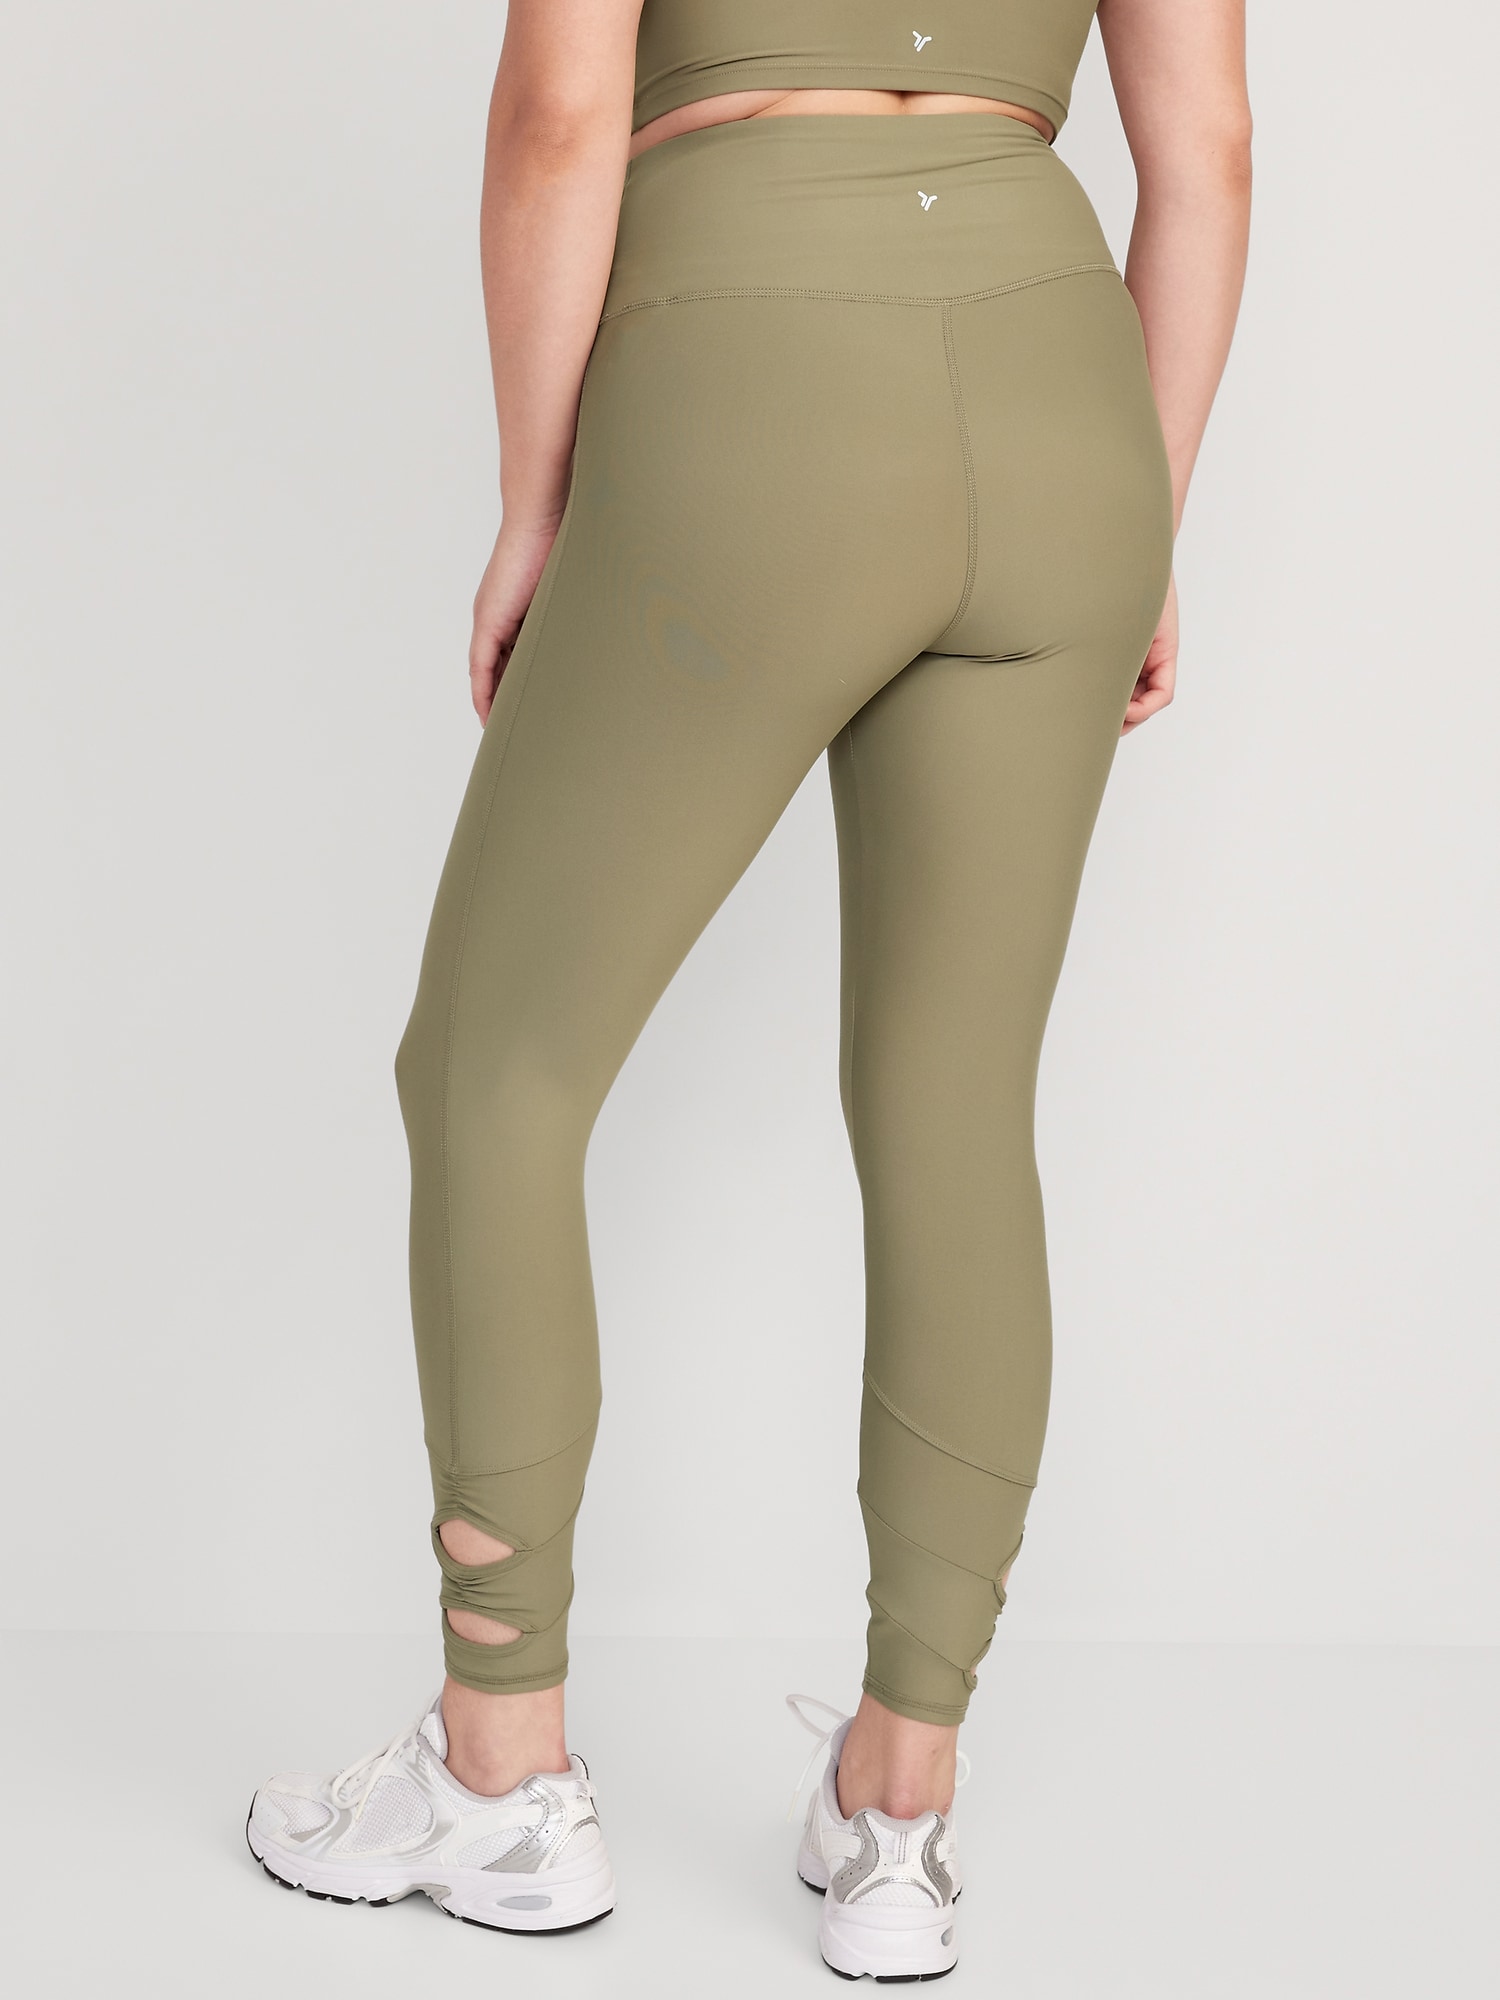 NWT: Old Navy Extra High-Waisted Powersoft Lt. Compression